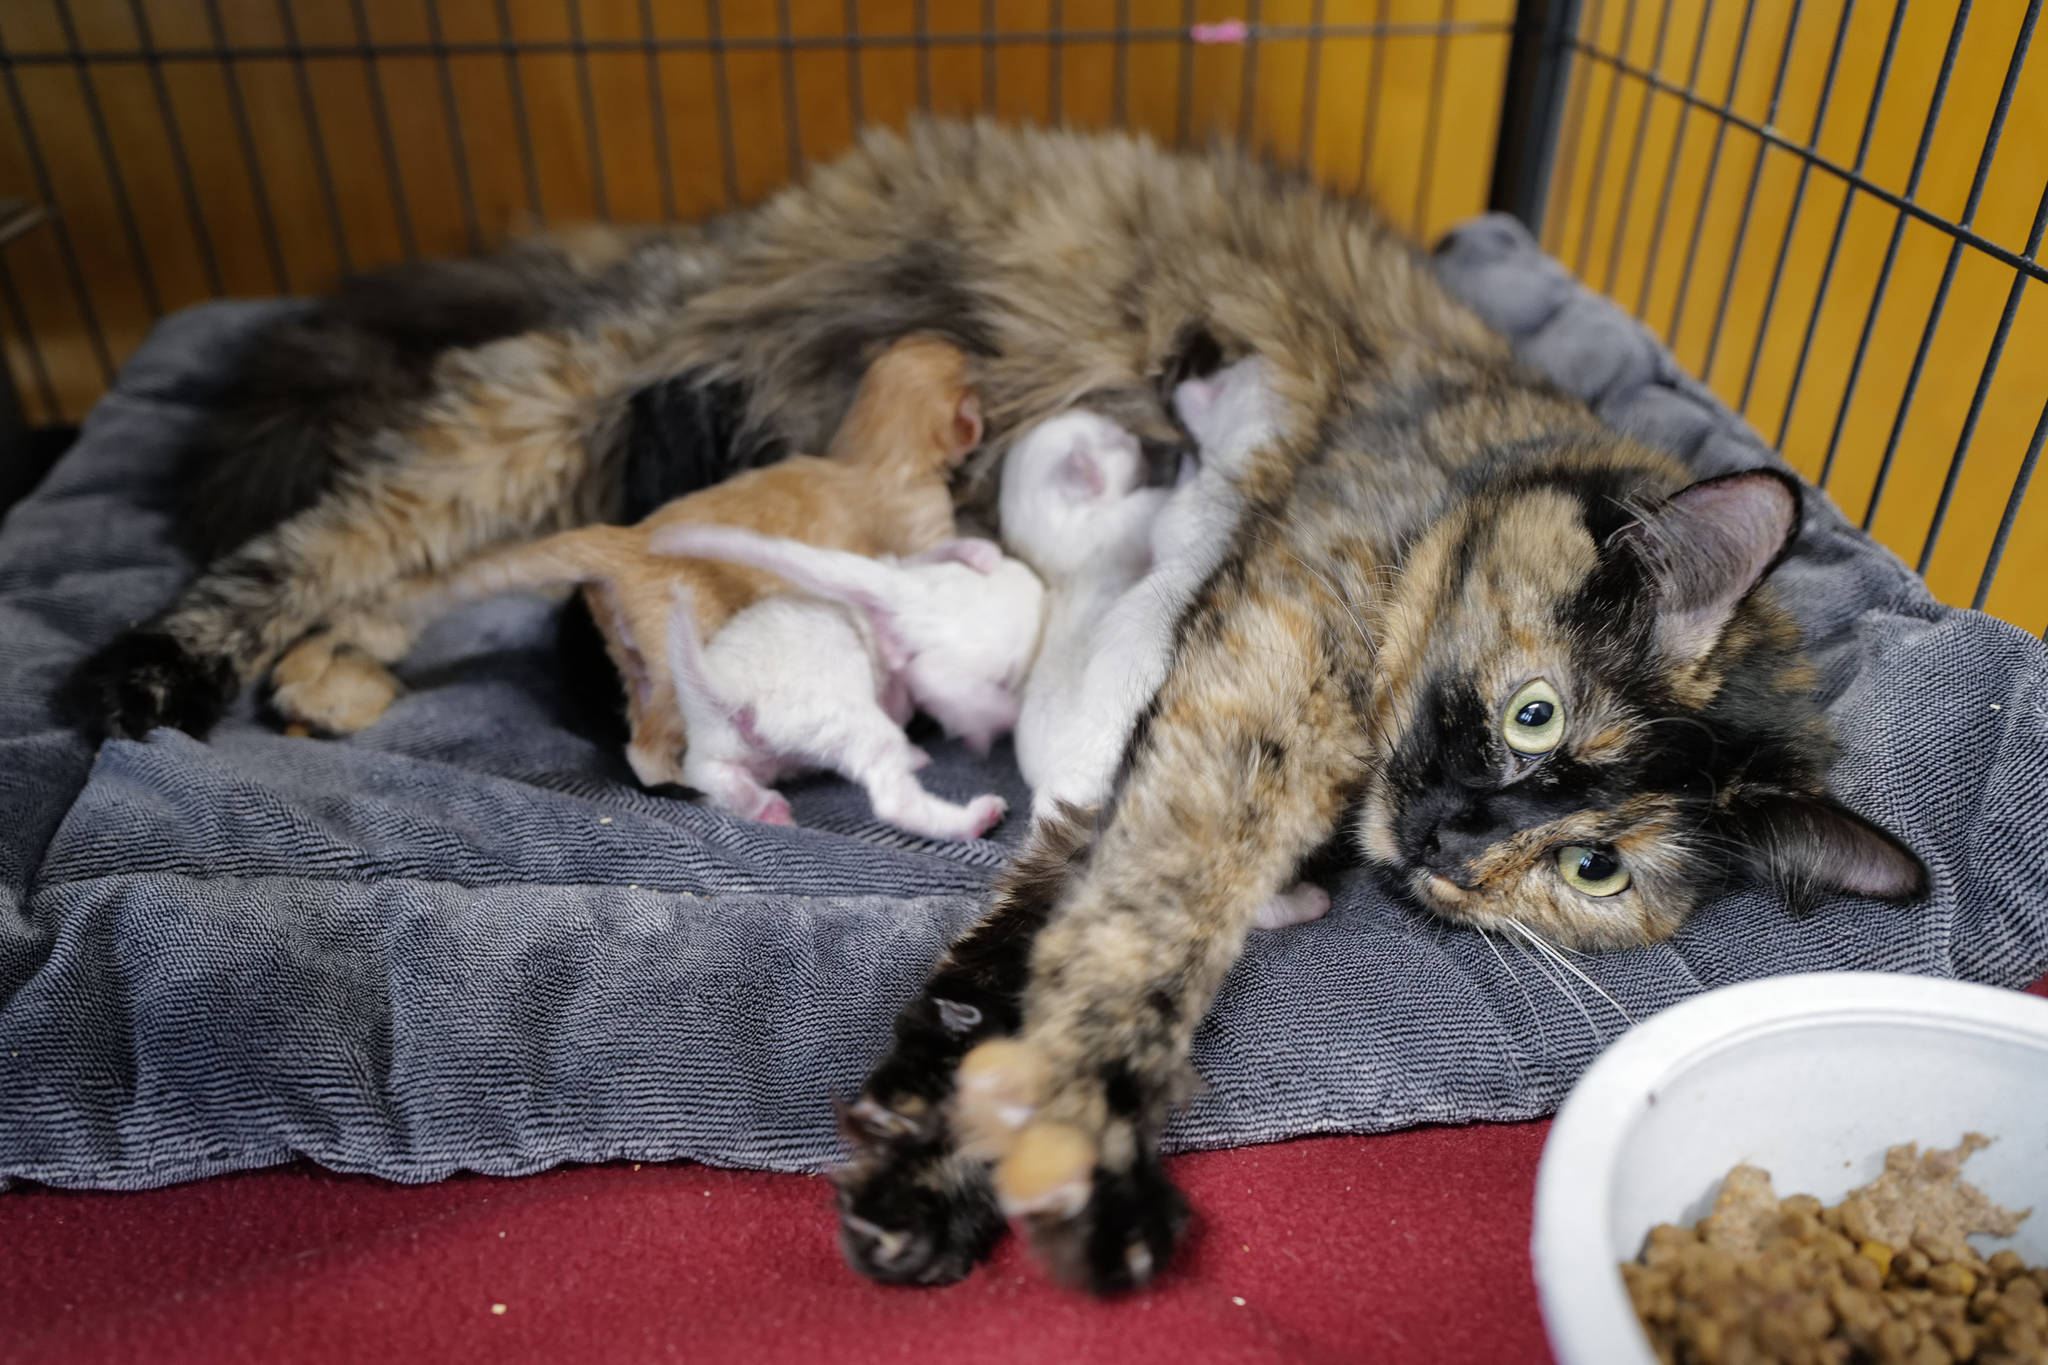 A mother cat feeds her day-old kittens at the Juneau Animal Rescue on Tuesday, July 2, 2019. (Michael Penn | Juneau Empire)